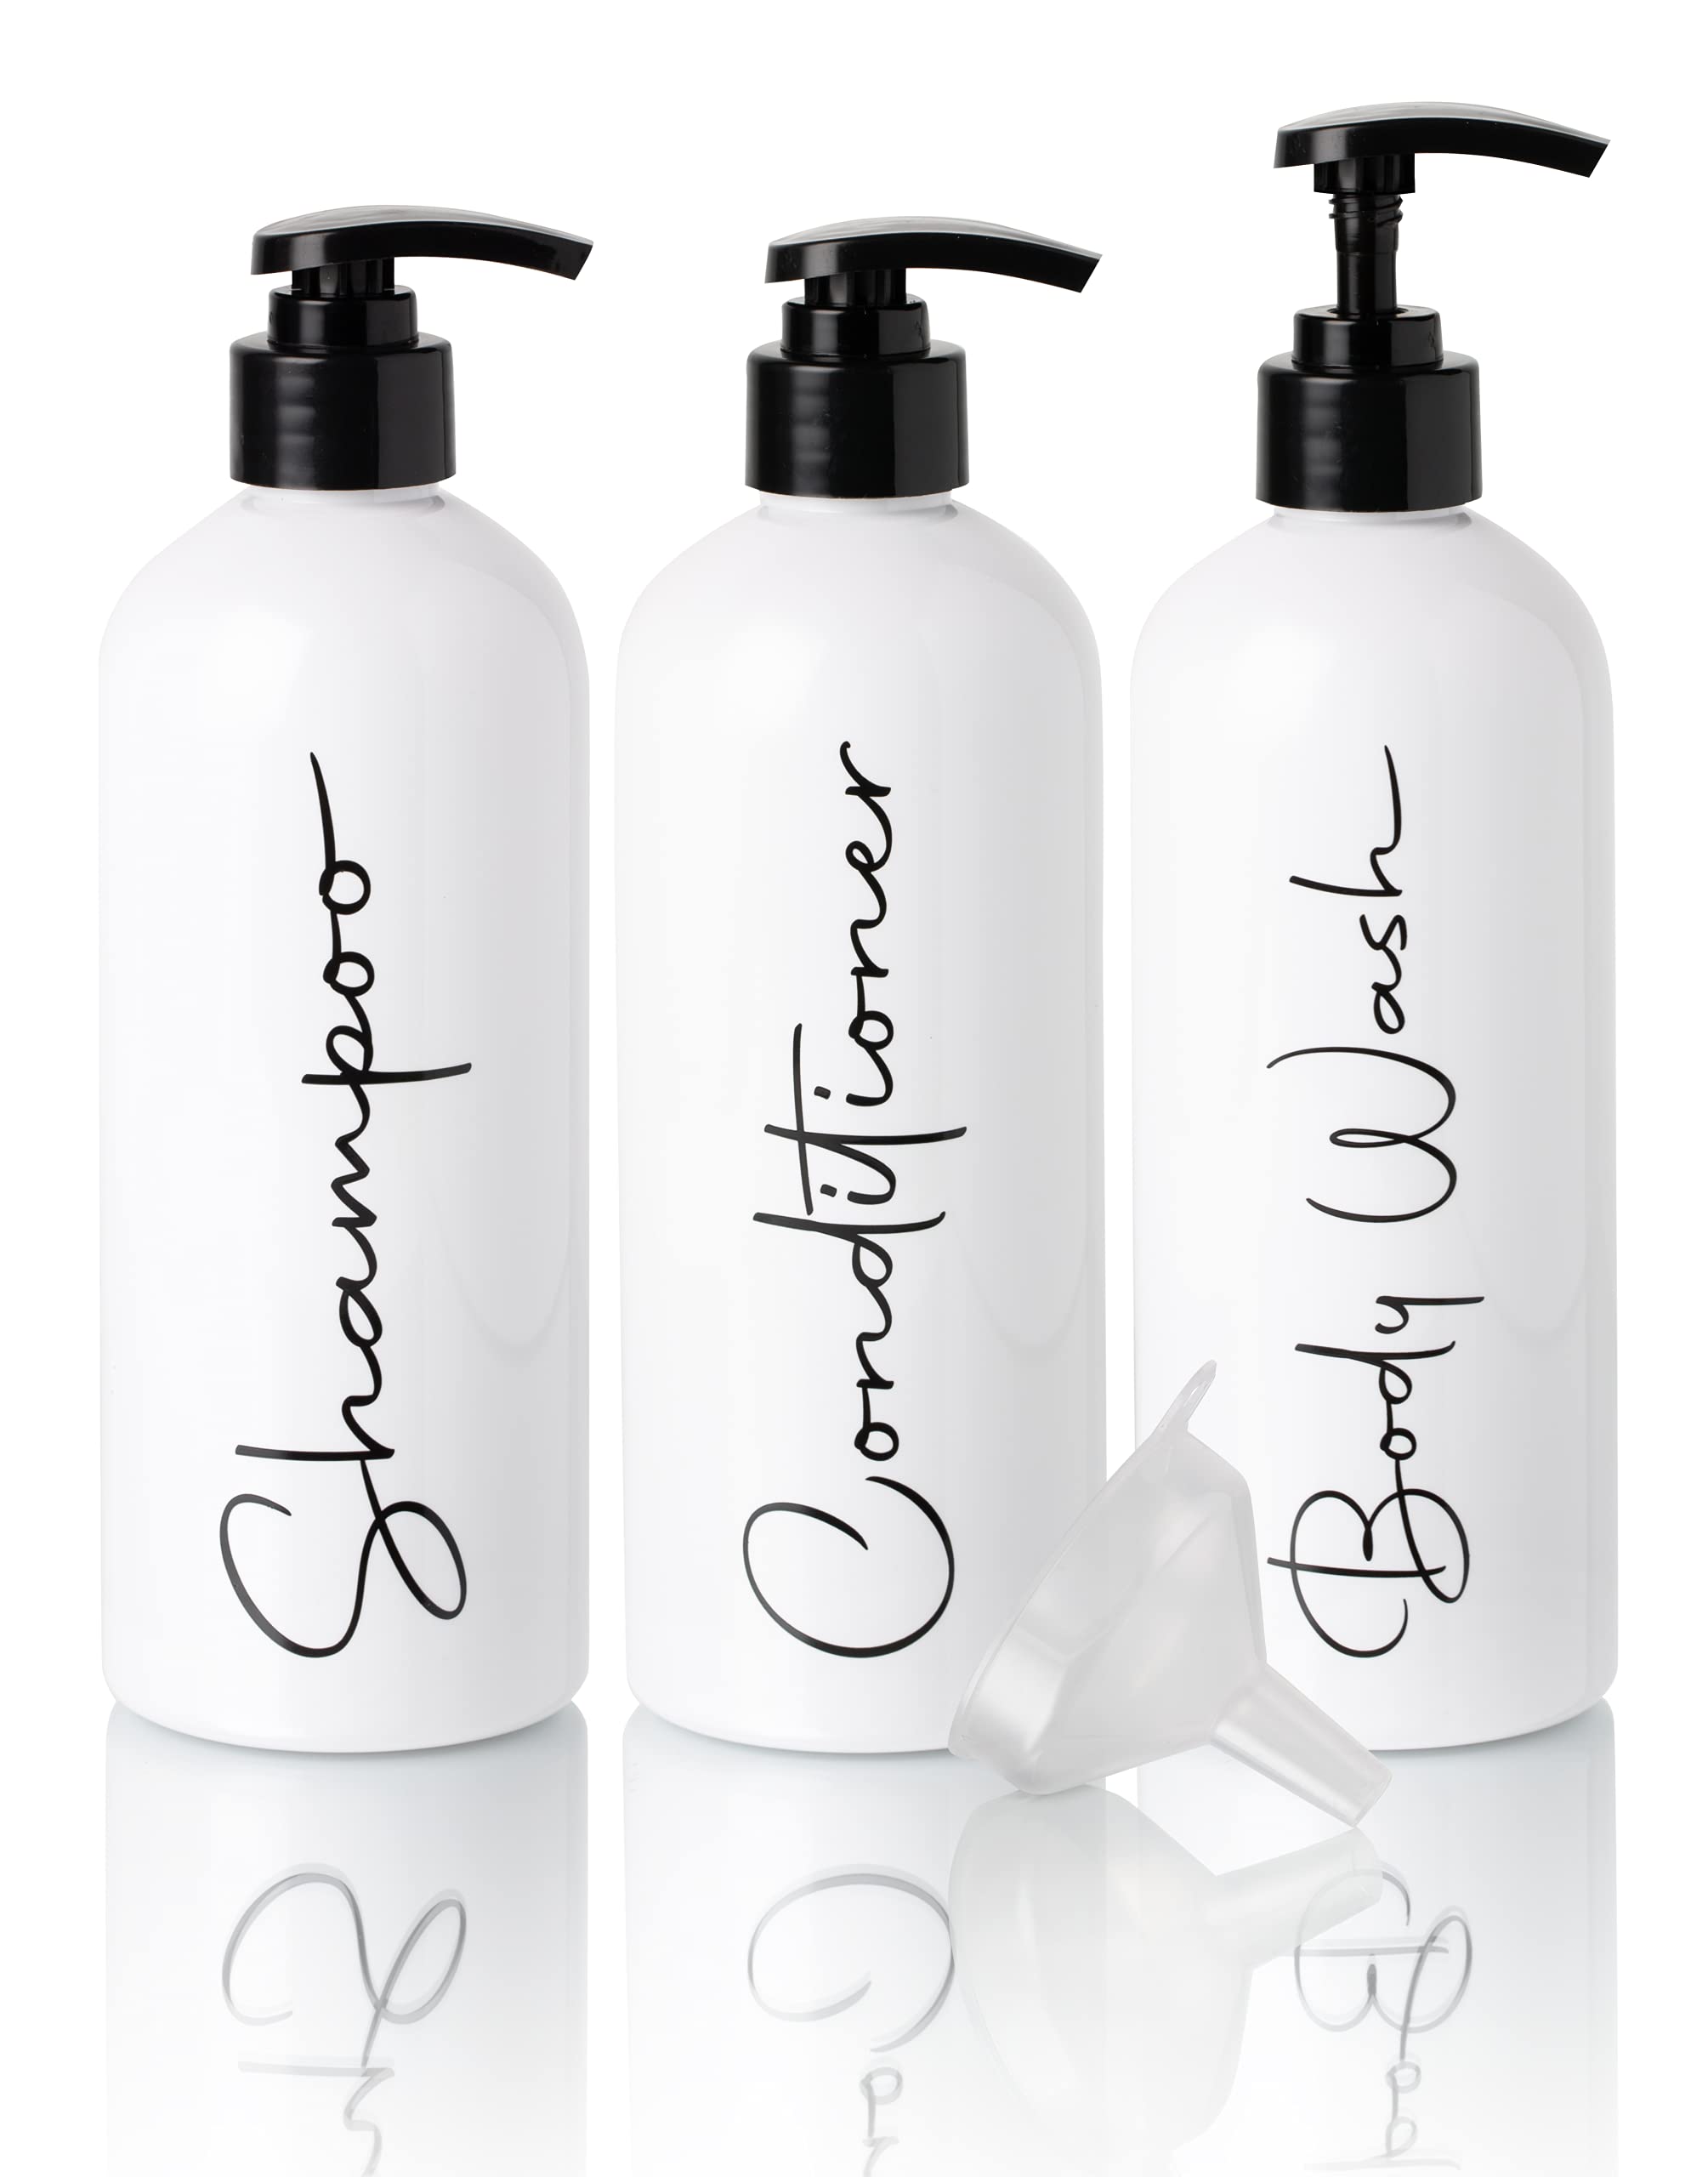 kobling Supersonic hastighed I udlandet Alora 16oz Reusable Shampoo and Conditioner Bottles - Set of 3 - Easy to  Read Labels - Pump Bottle Dispenser for Shampoo, Conditioner, Body Wash -  Empty Plastic Refillable Containers for Shower Set of 3 (16oz) White